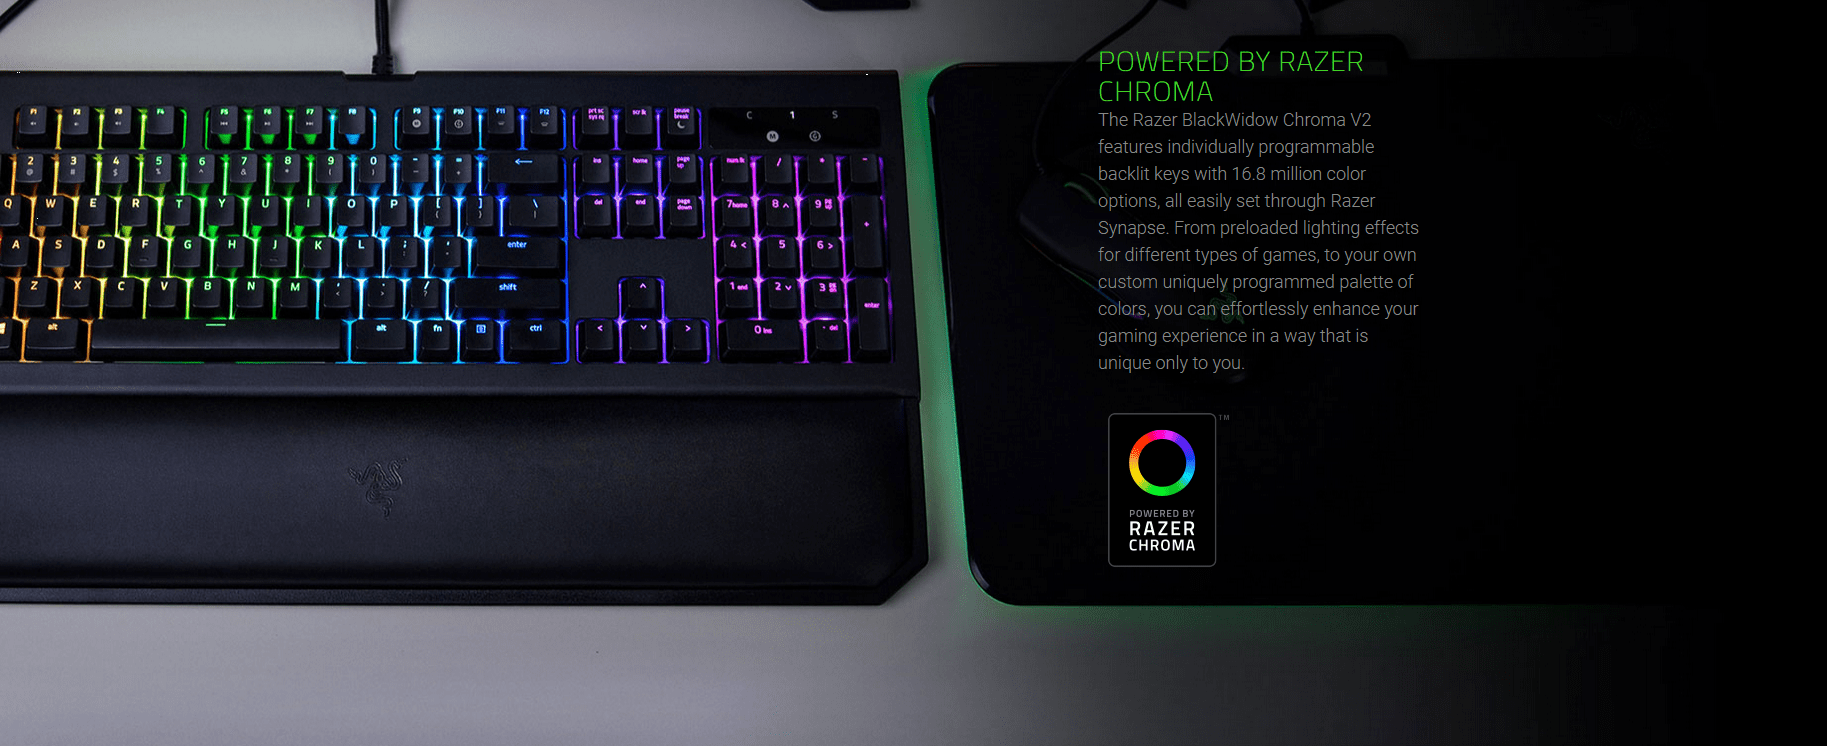 Microsoft Teaming Up With Razer for Xbox Keyboard & Mouse Support